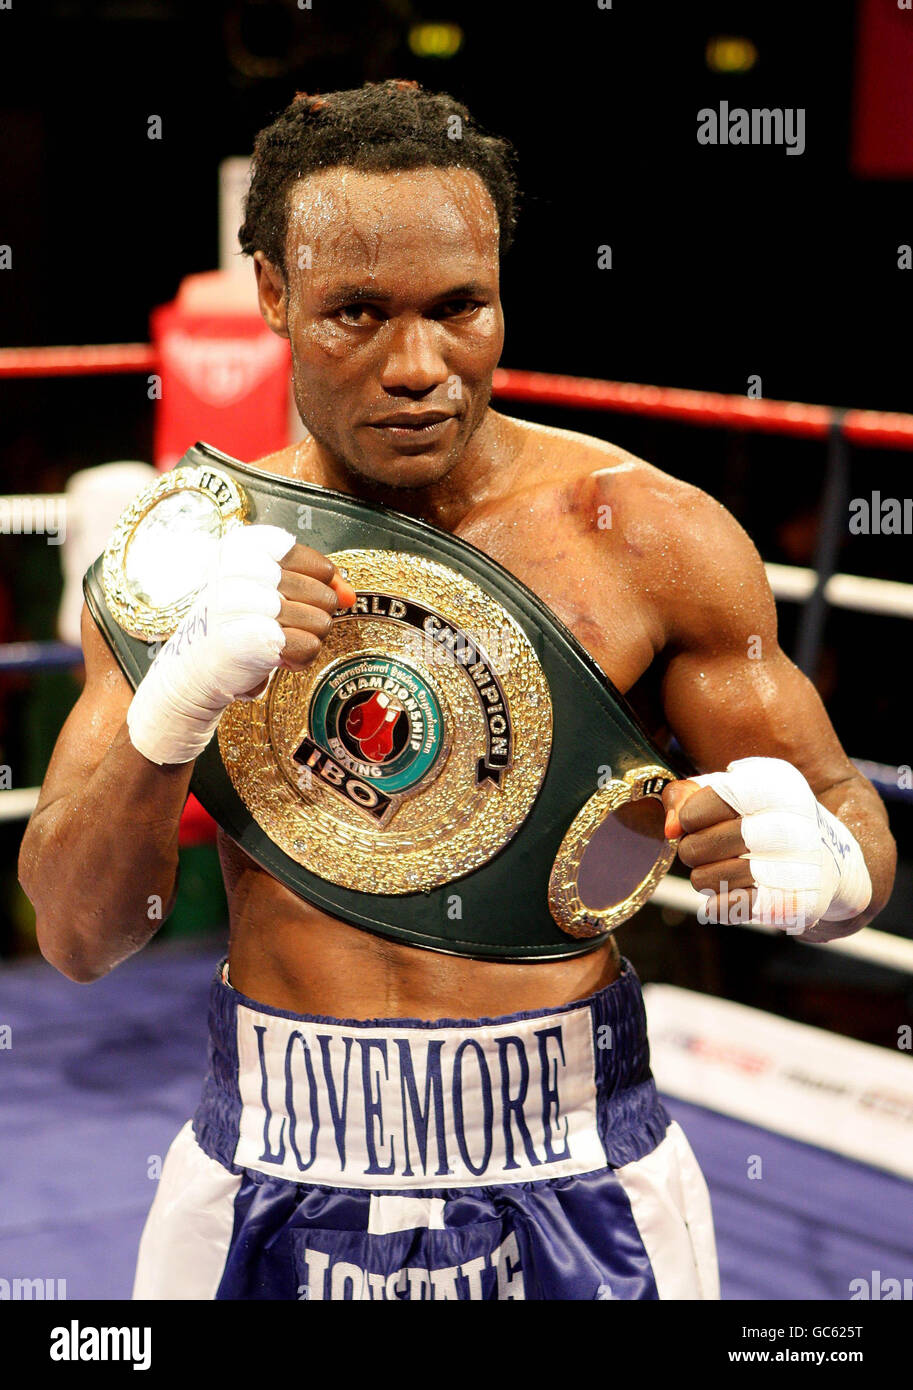 Lovemore N'Dou with his IBO Welterweight belt after his draw with Matthew Hatton in their IBO Welterweight Title fight at the Fenton Manor Sports Complex, Stoke on Trent. Stock Photo